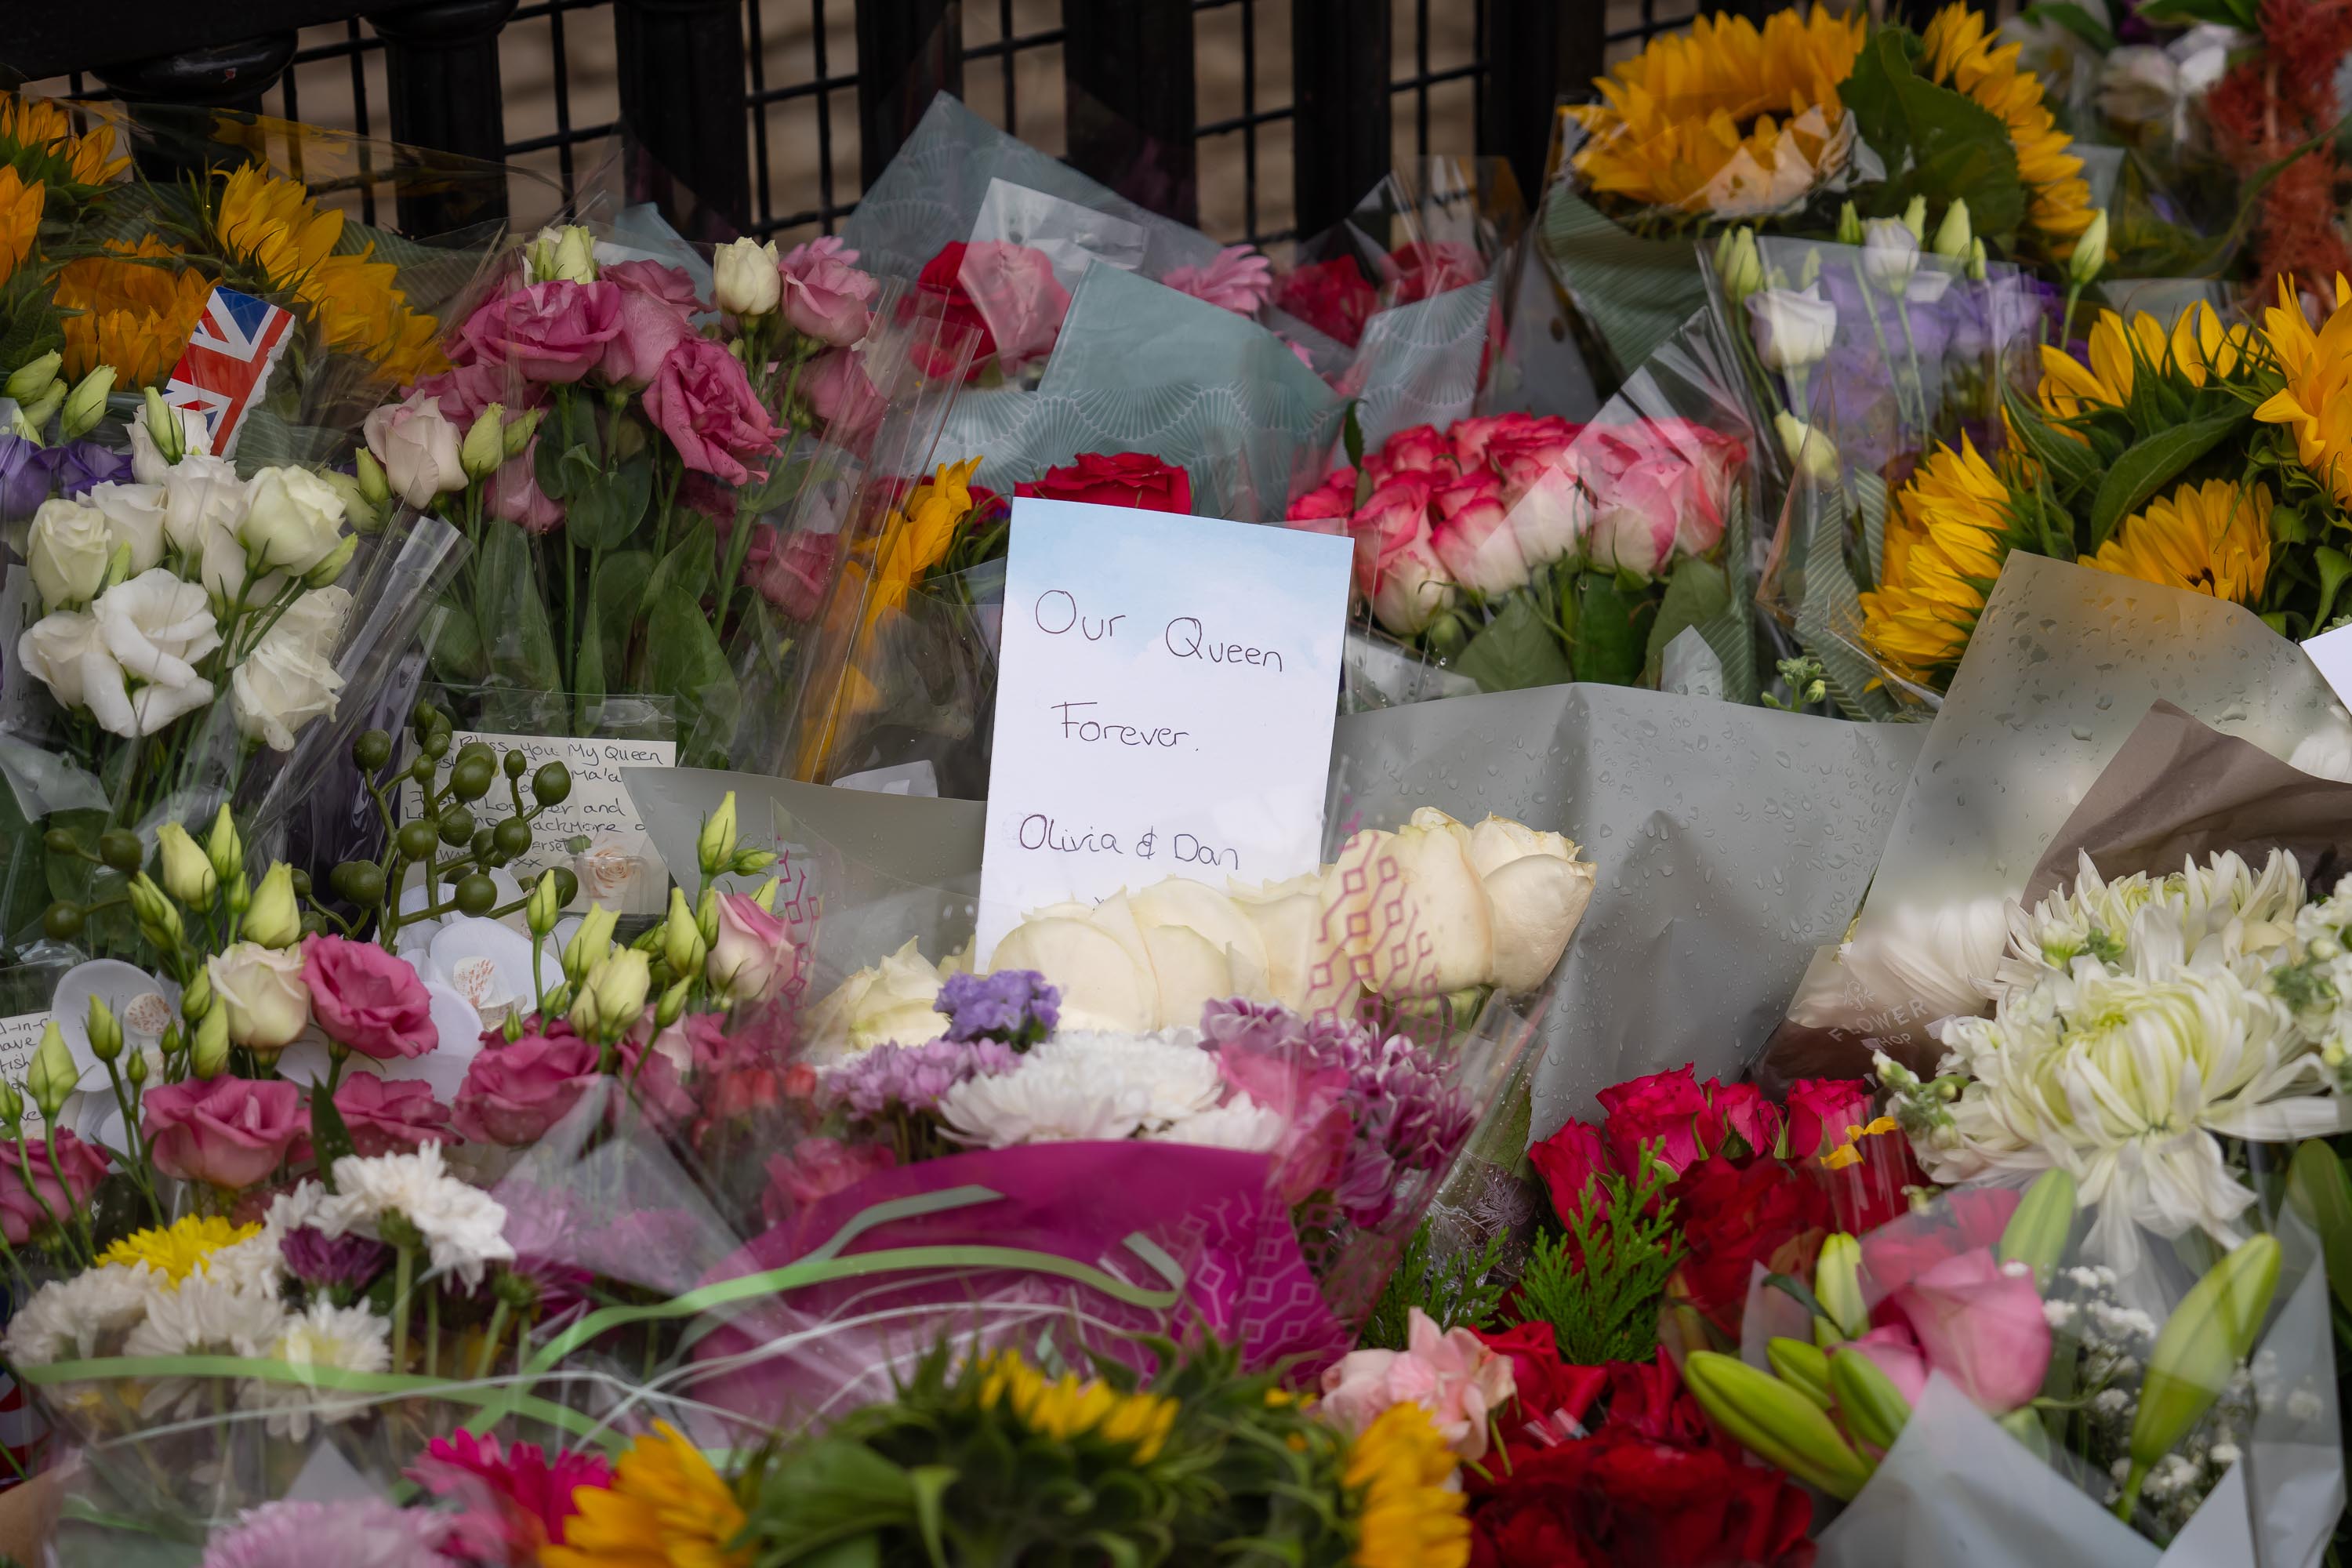 Flowers and notes left at Buckingham Palace